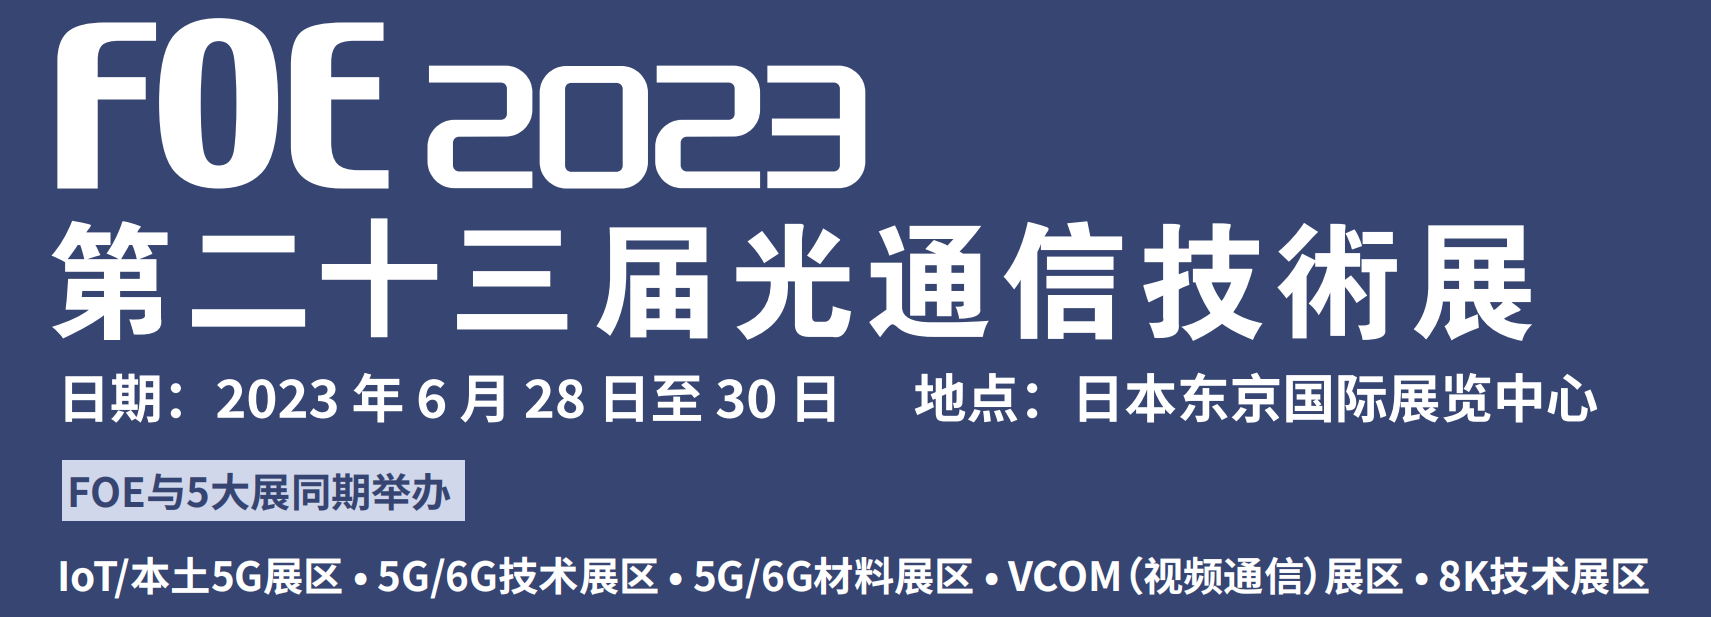 Dalian Youopto Technology co.,Ltd   participated in the 23rd Japan FOE Exhibition.